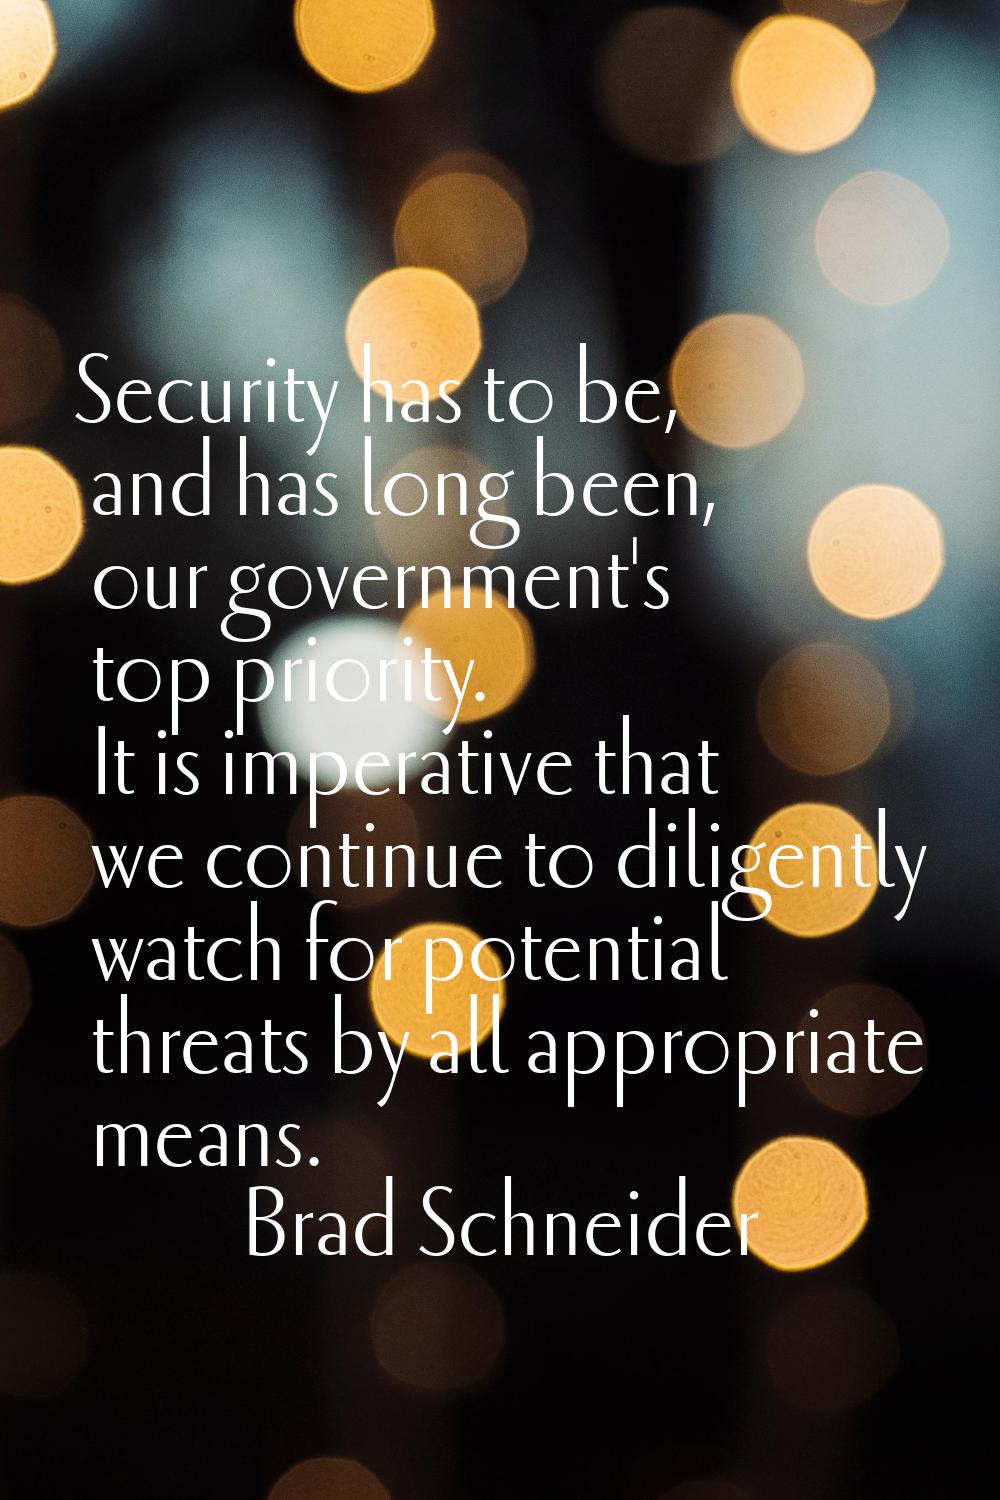 Security has to be, and has long been, our government's top priority. It is imperative that we cont